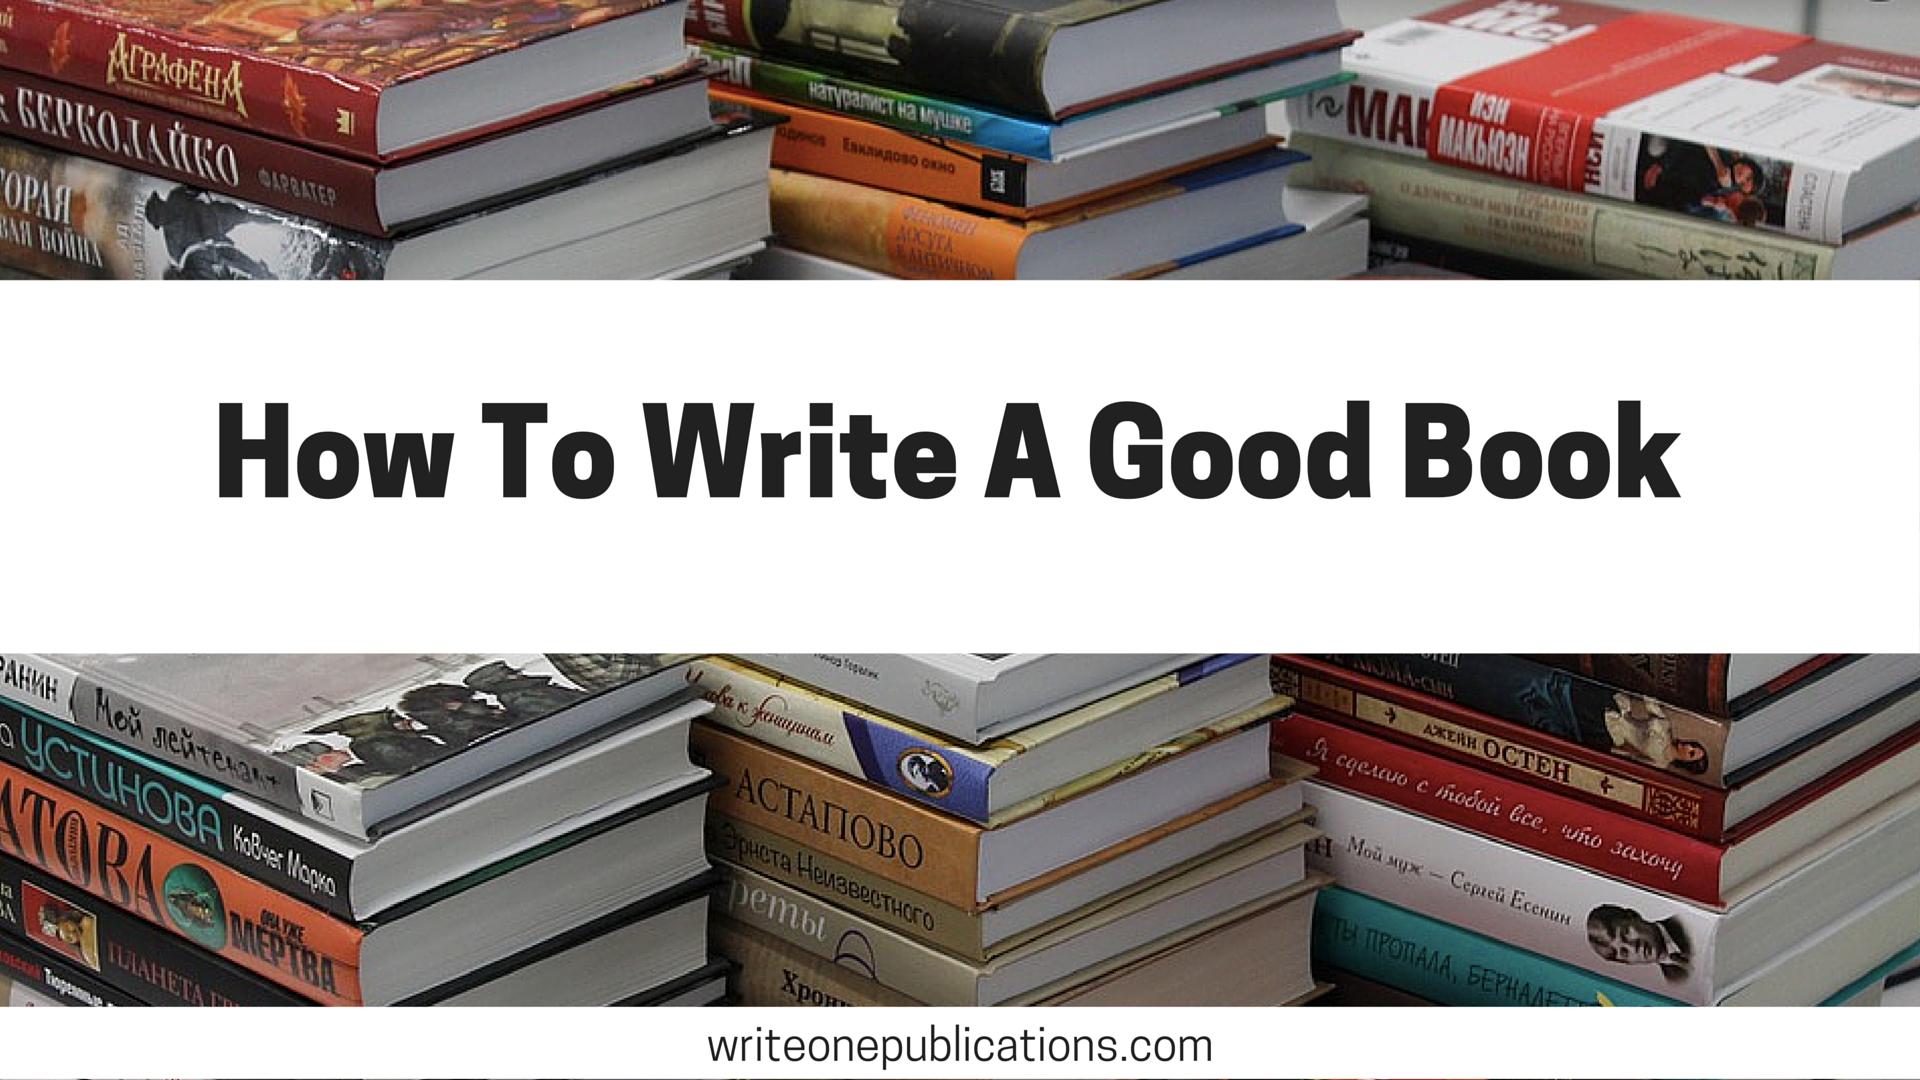 How To Write A Good Book